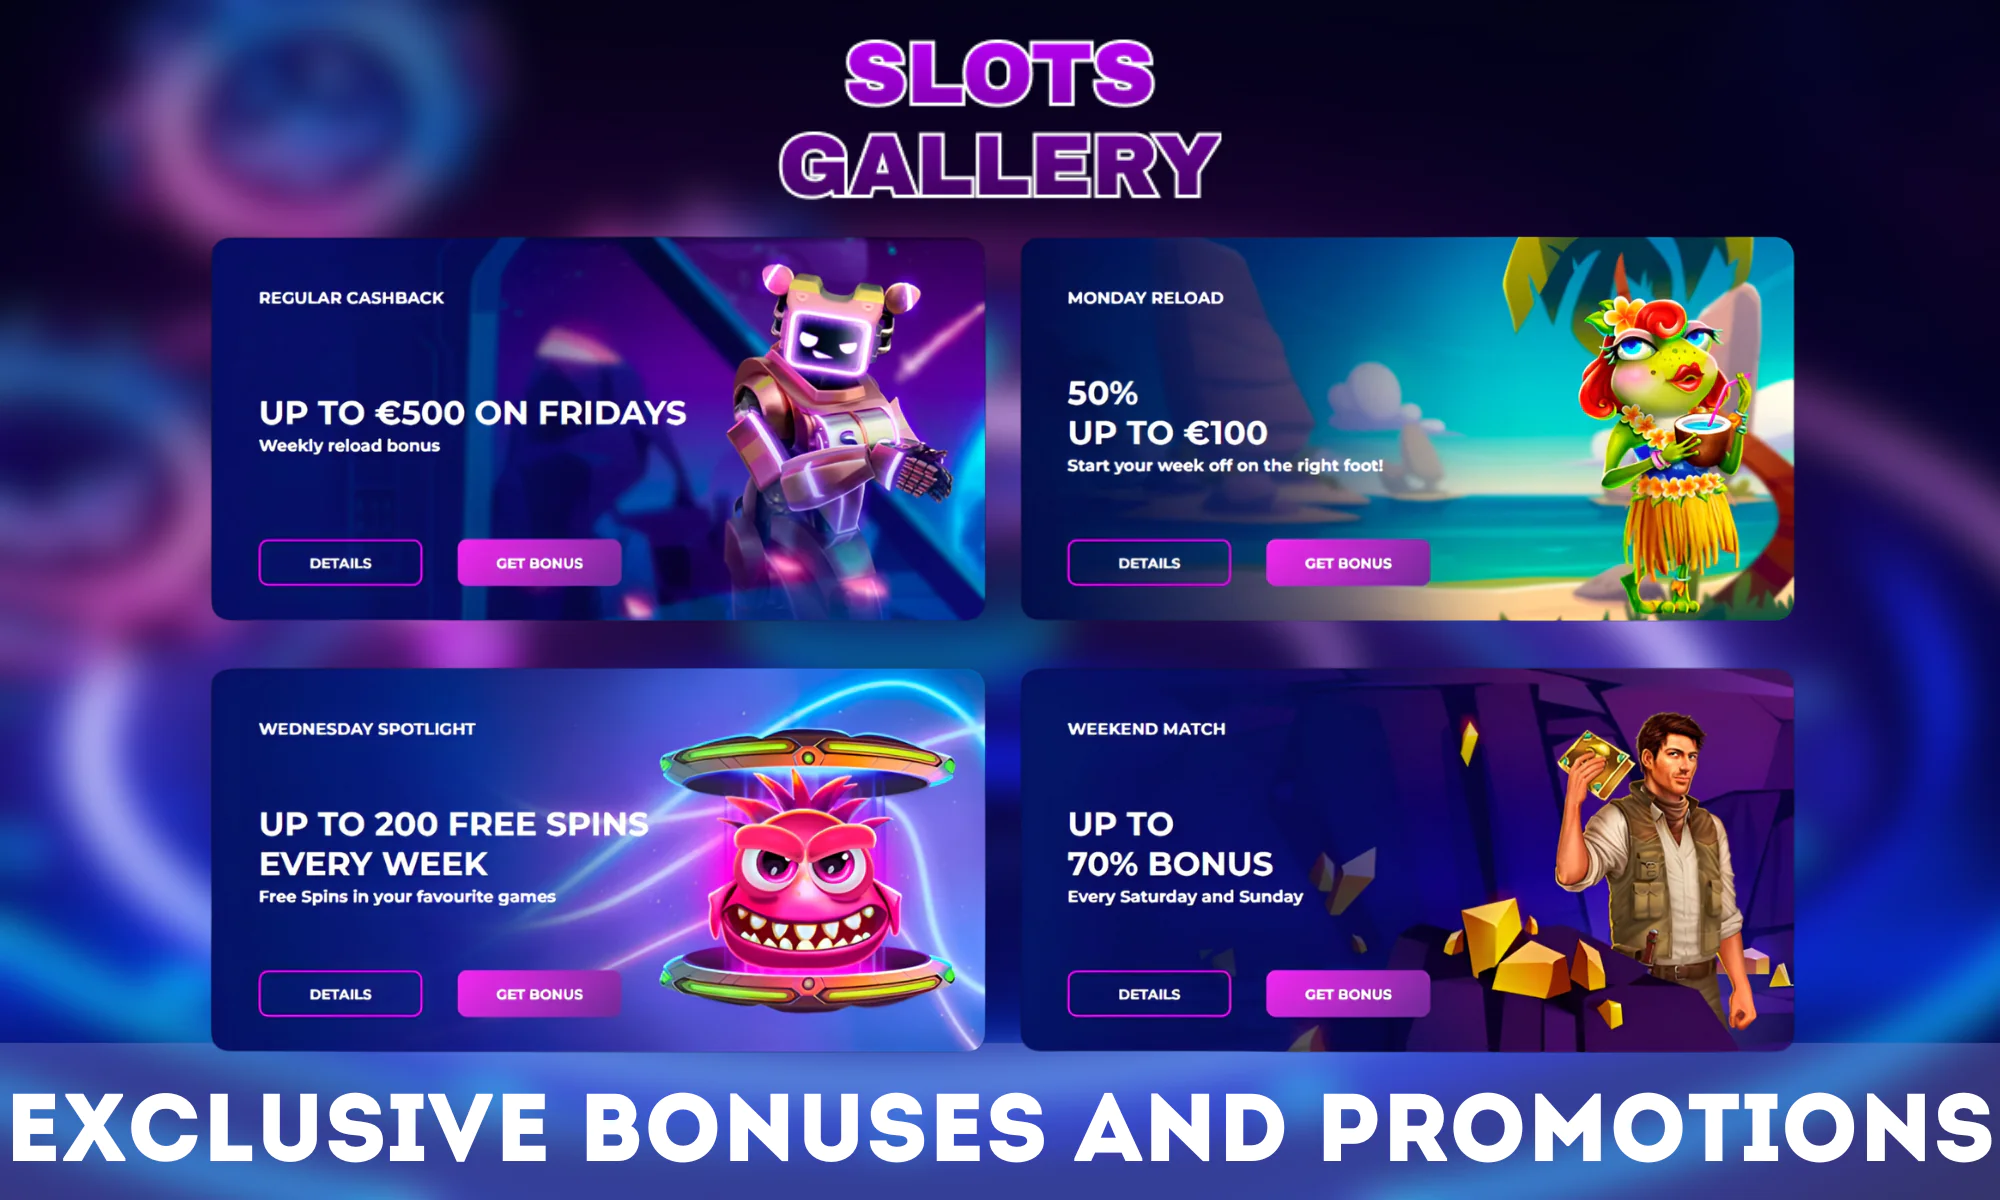 Slots Gallery offers its users unique bonuses